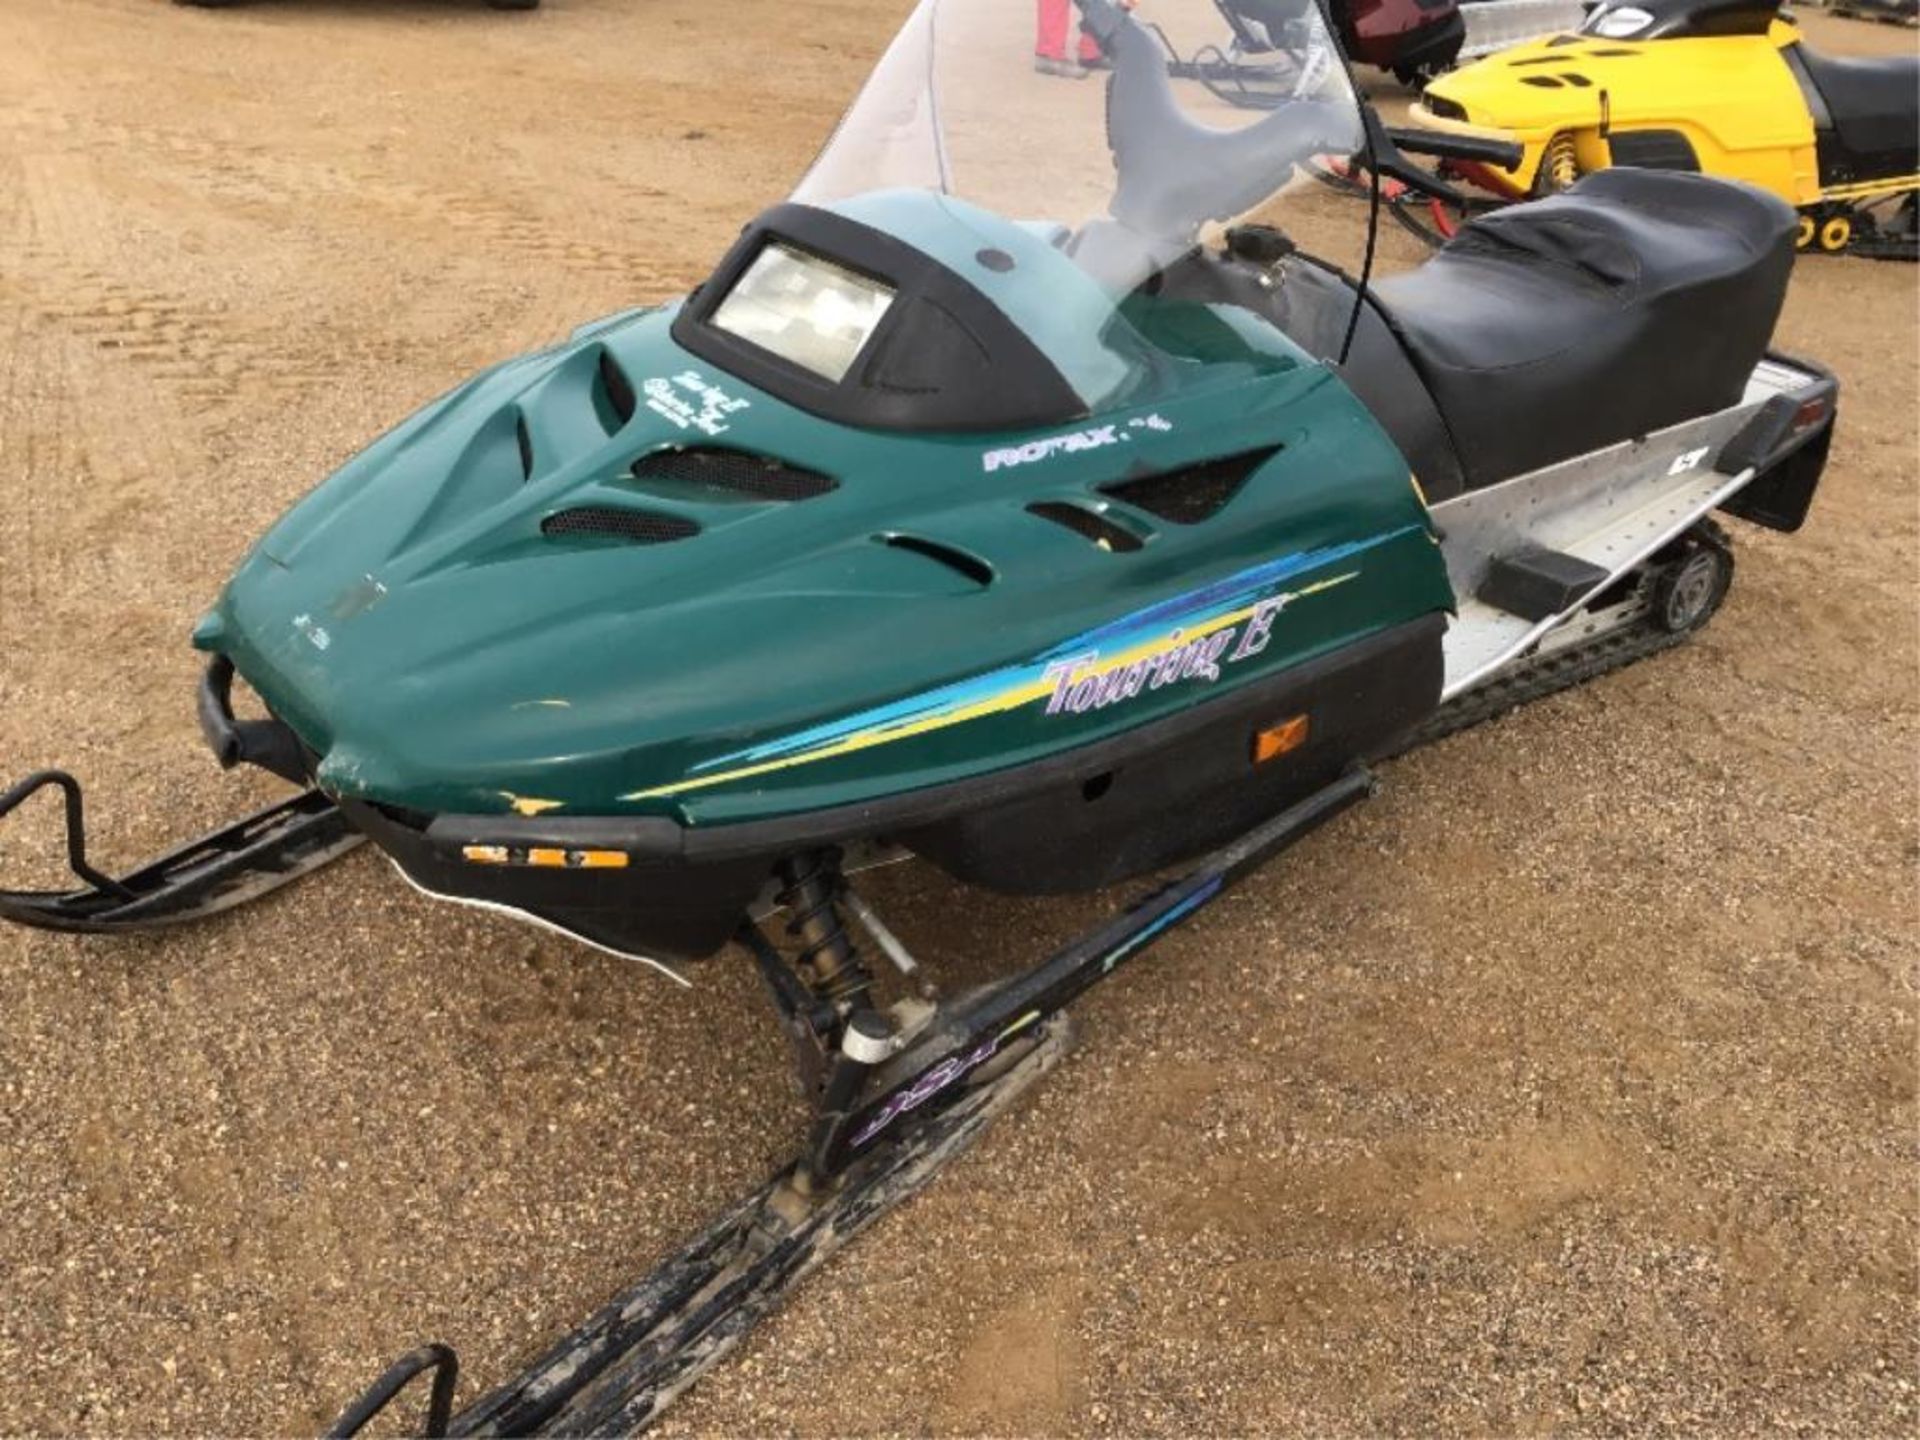 1996 380 Rotax Touring E Bombardier Snowmobile sn 1542-03238 Elec Start, Warmers not Working - Image 2 of 2